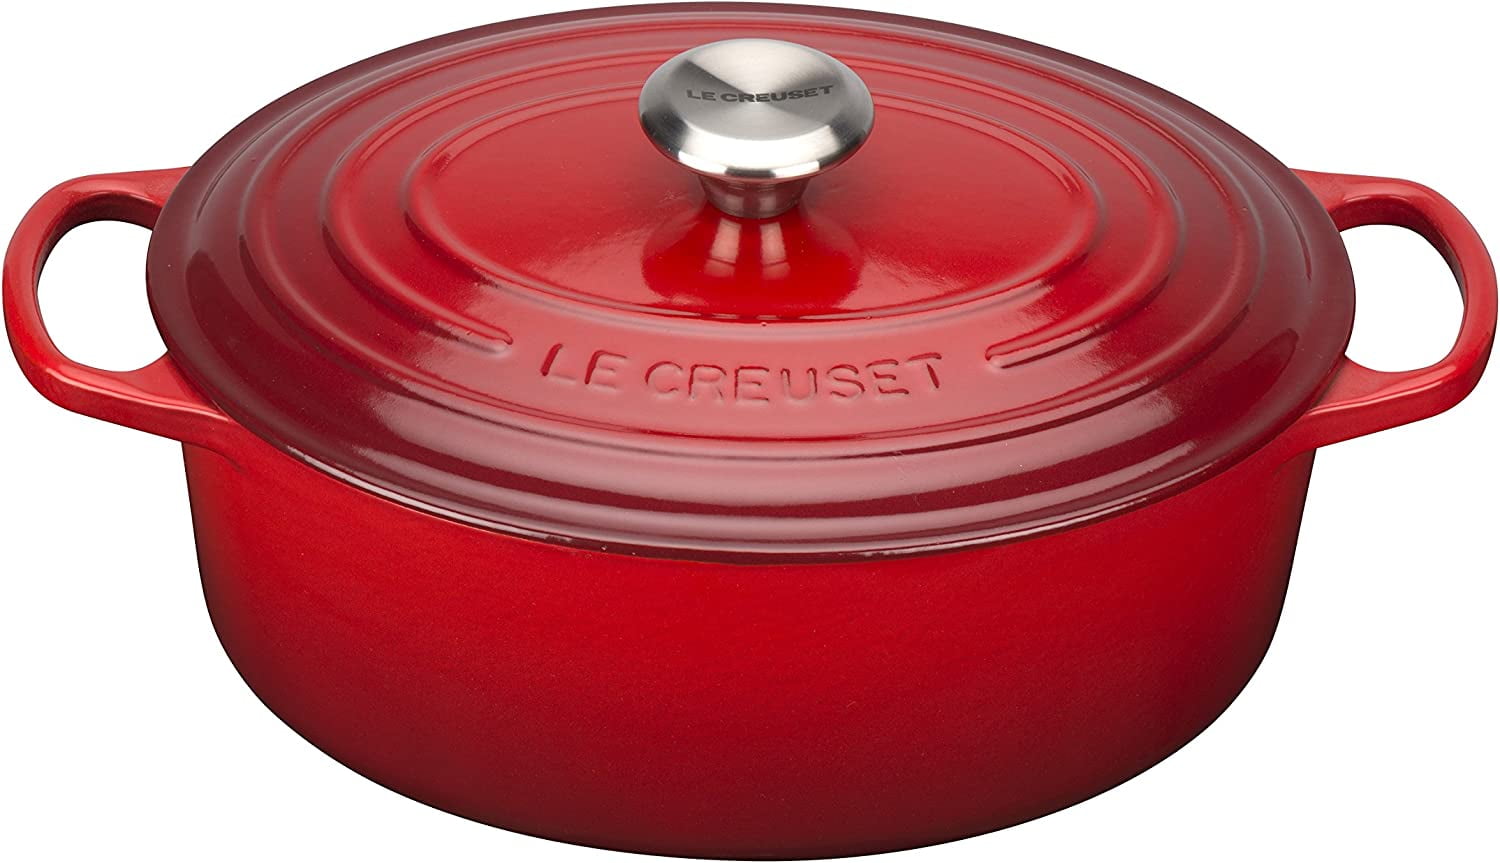 Le Cuistot Enameled Cast Iron Casserole Pot  4.5 Quart Dutch Oven,  Beautiful Graduated Red Color, Oven Safe and Induction Compatible, Easy  Maintenance 